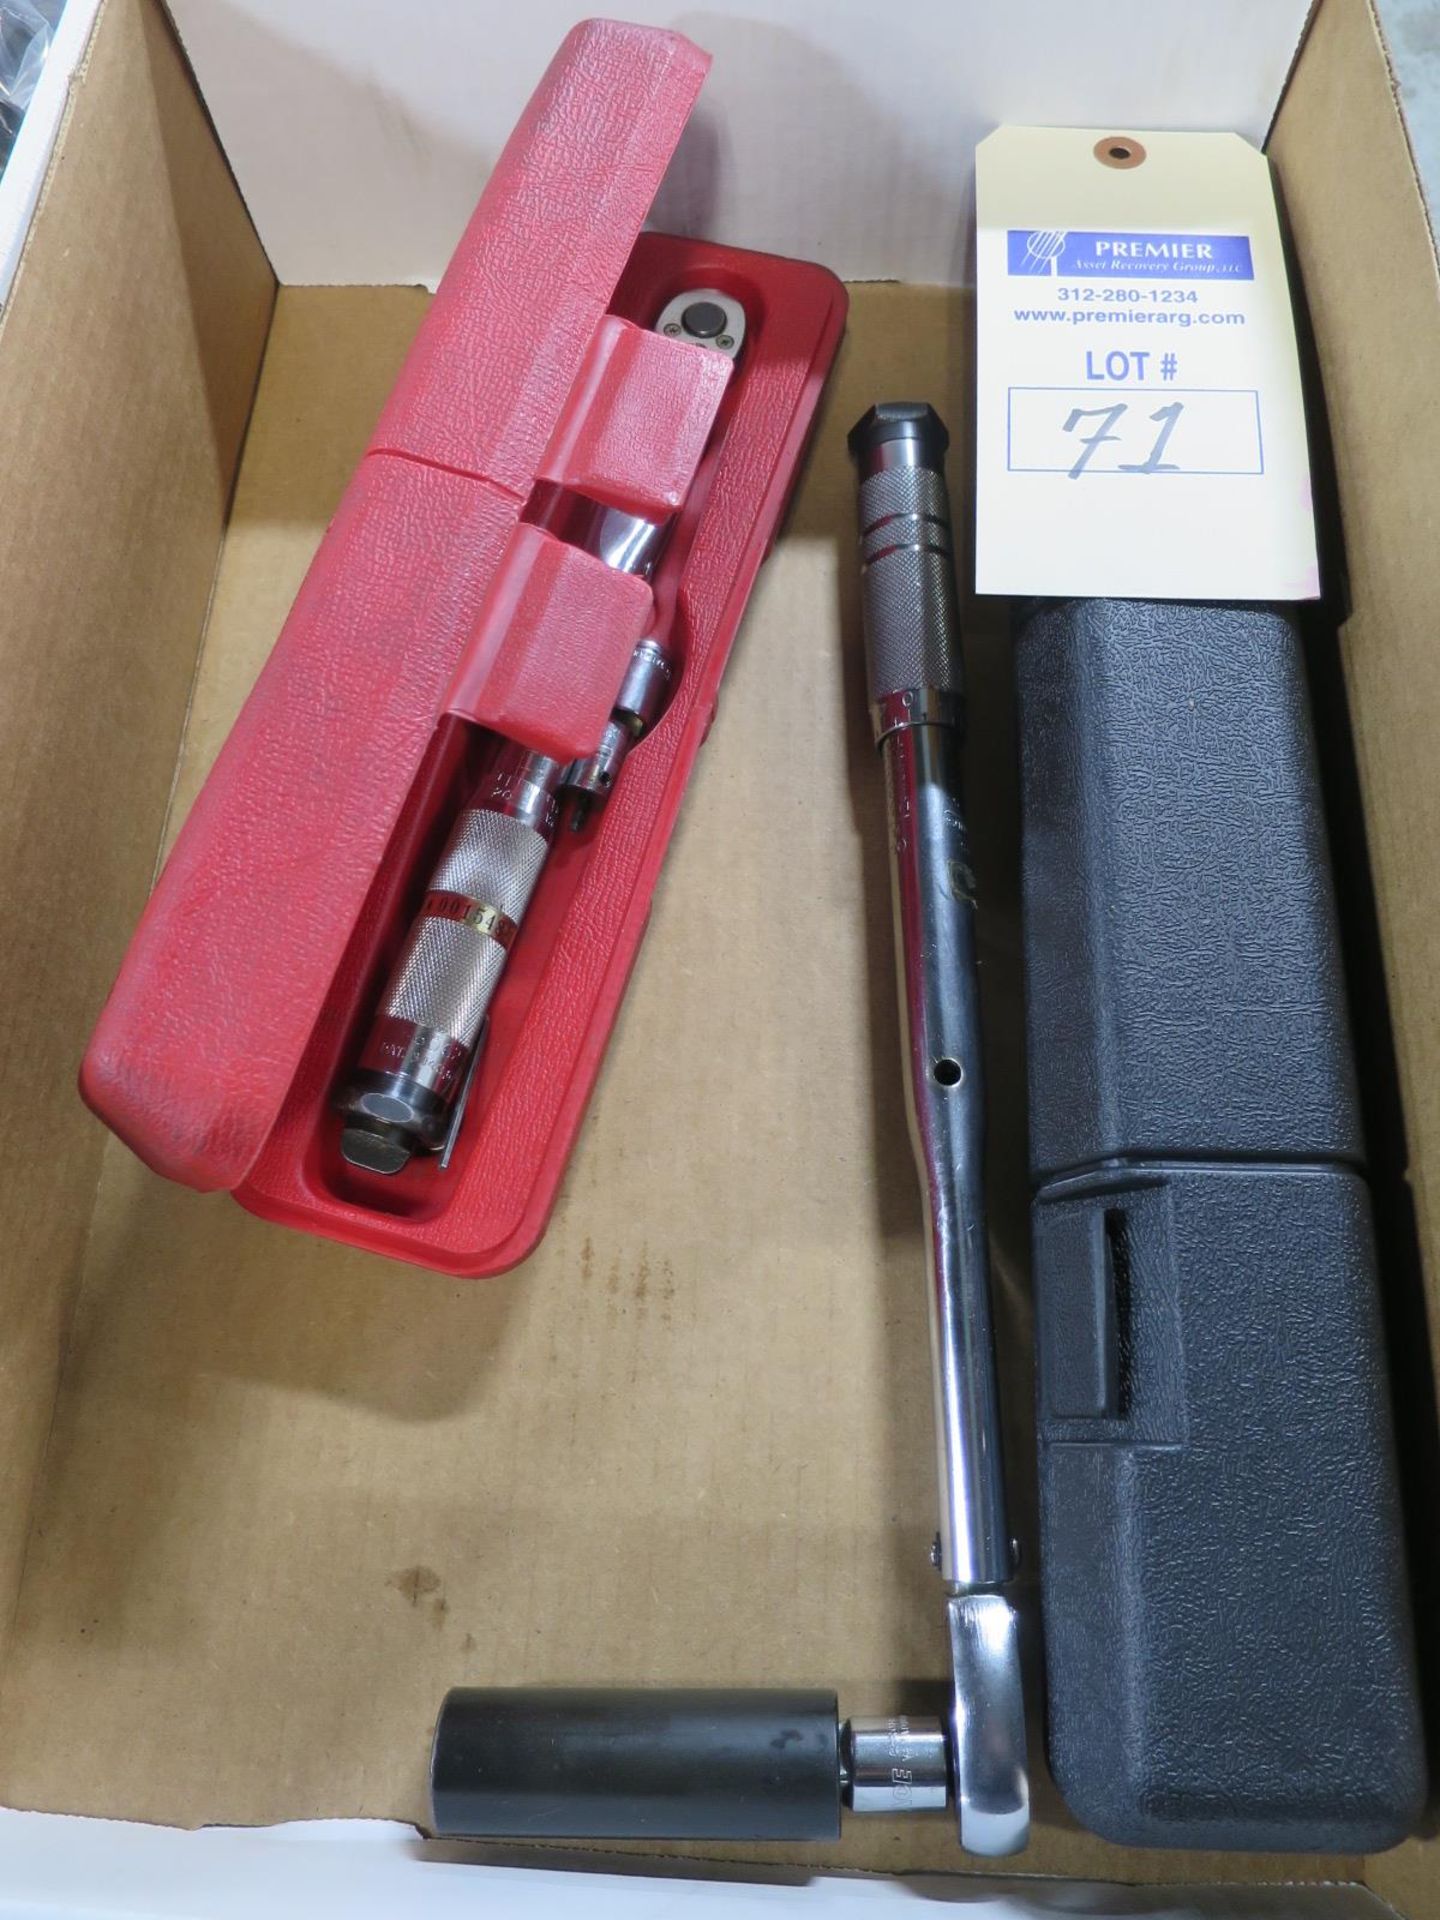 (2) Torque Wrenches